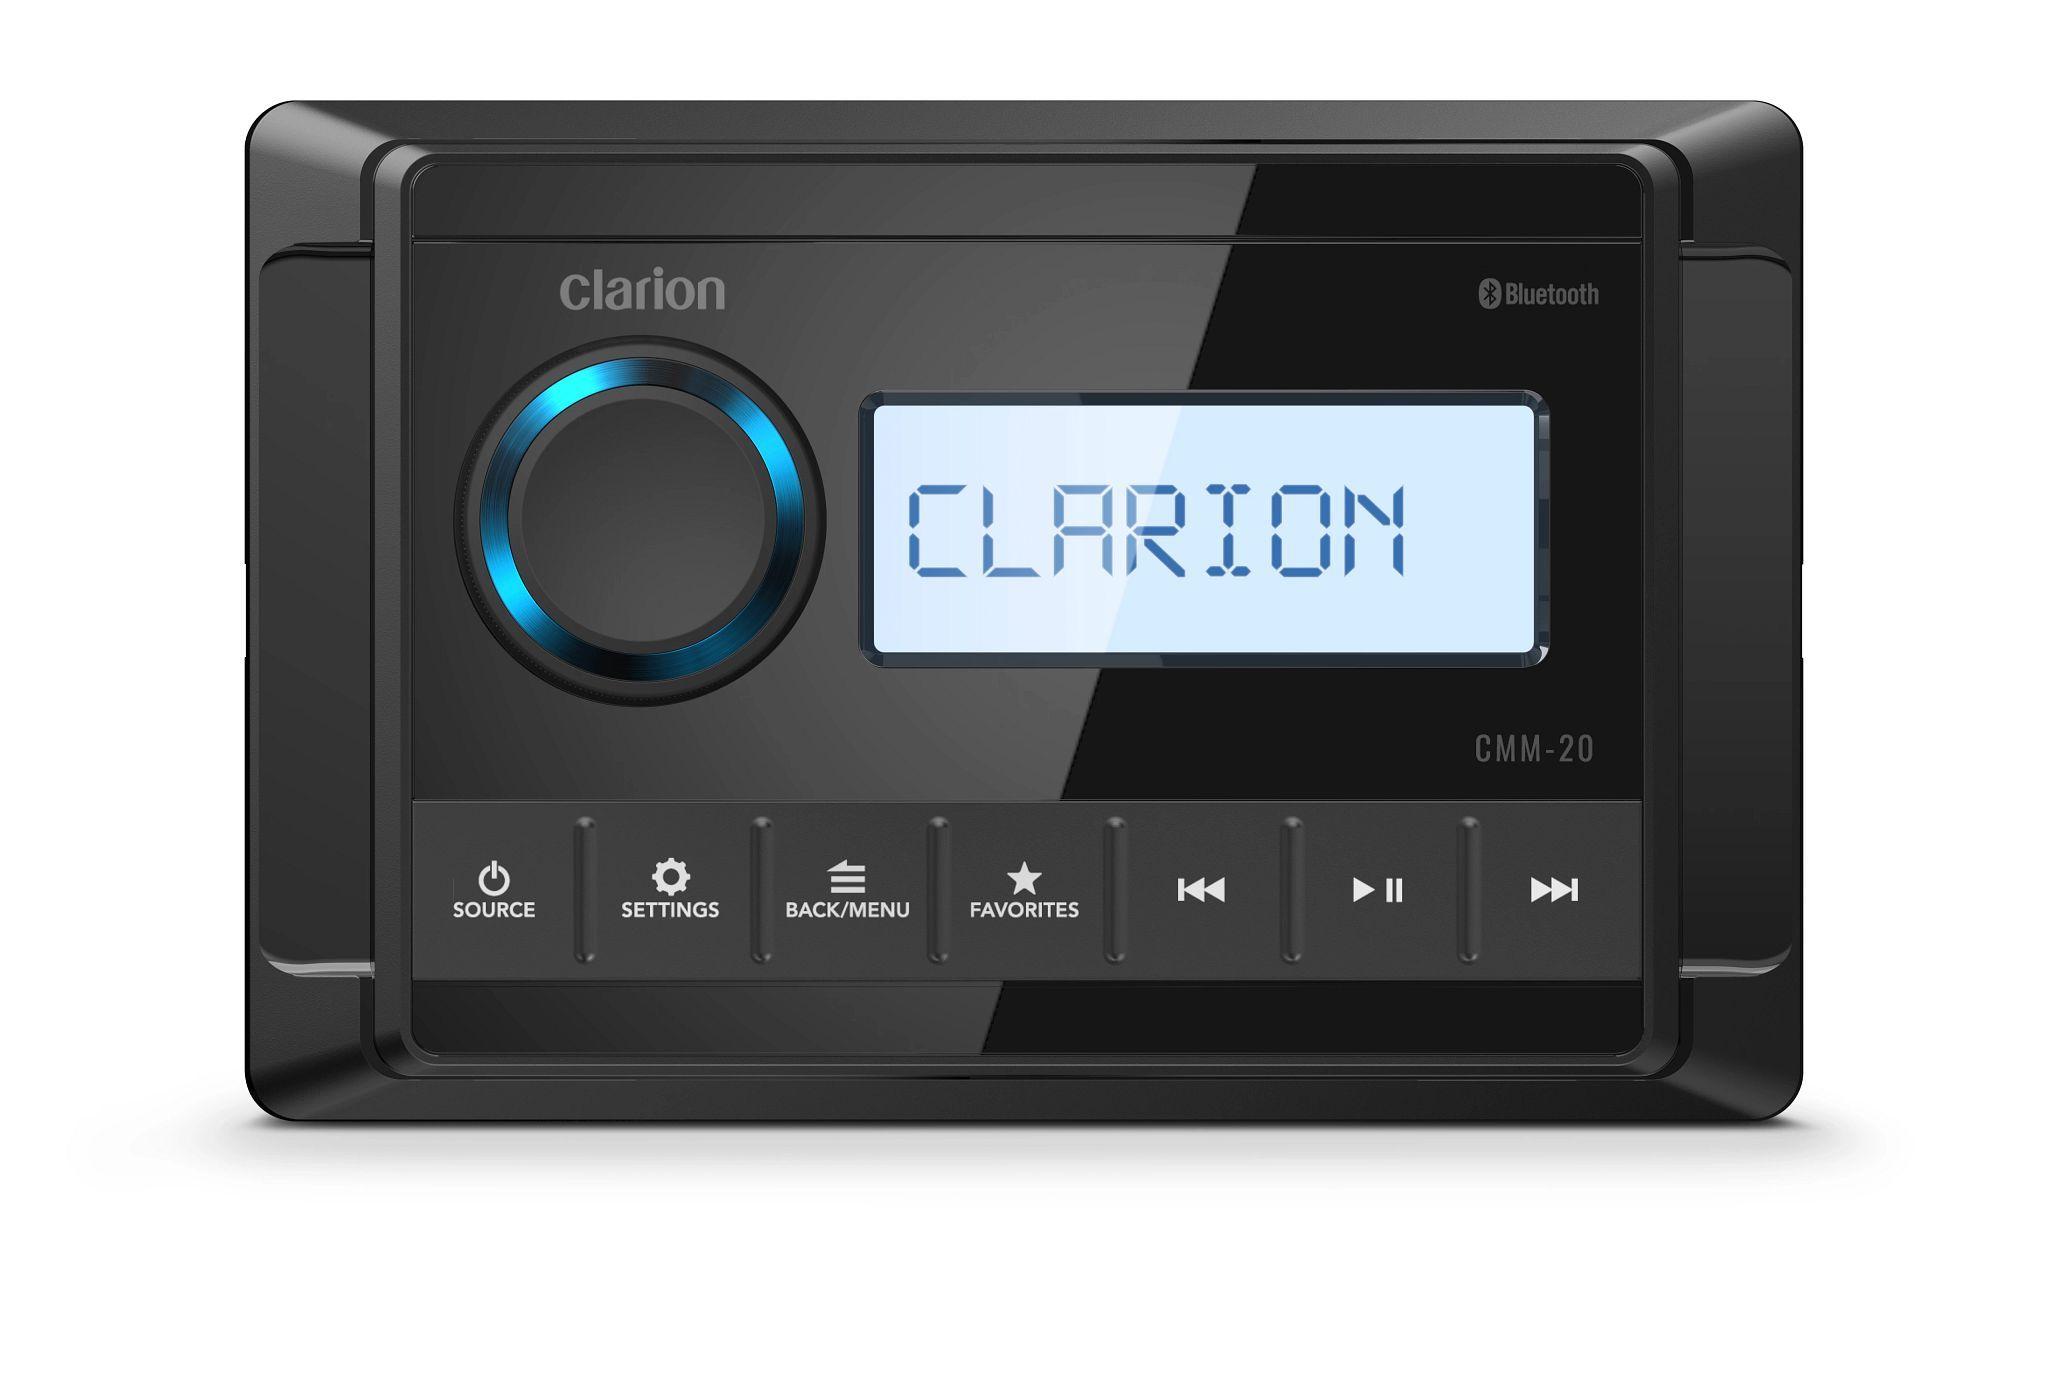 CLARION Marine Source Unit (IP66 rated) with 2.37-inch (60 mm) Monochrome LCD Display. Features: Global AM/FM Tuner, NOAA Weather Radio, Bluetooth 5.0, USB 2.0 (1A charging), Aux Input, Built-in 100W